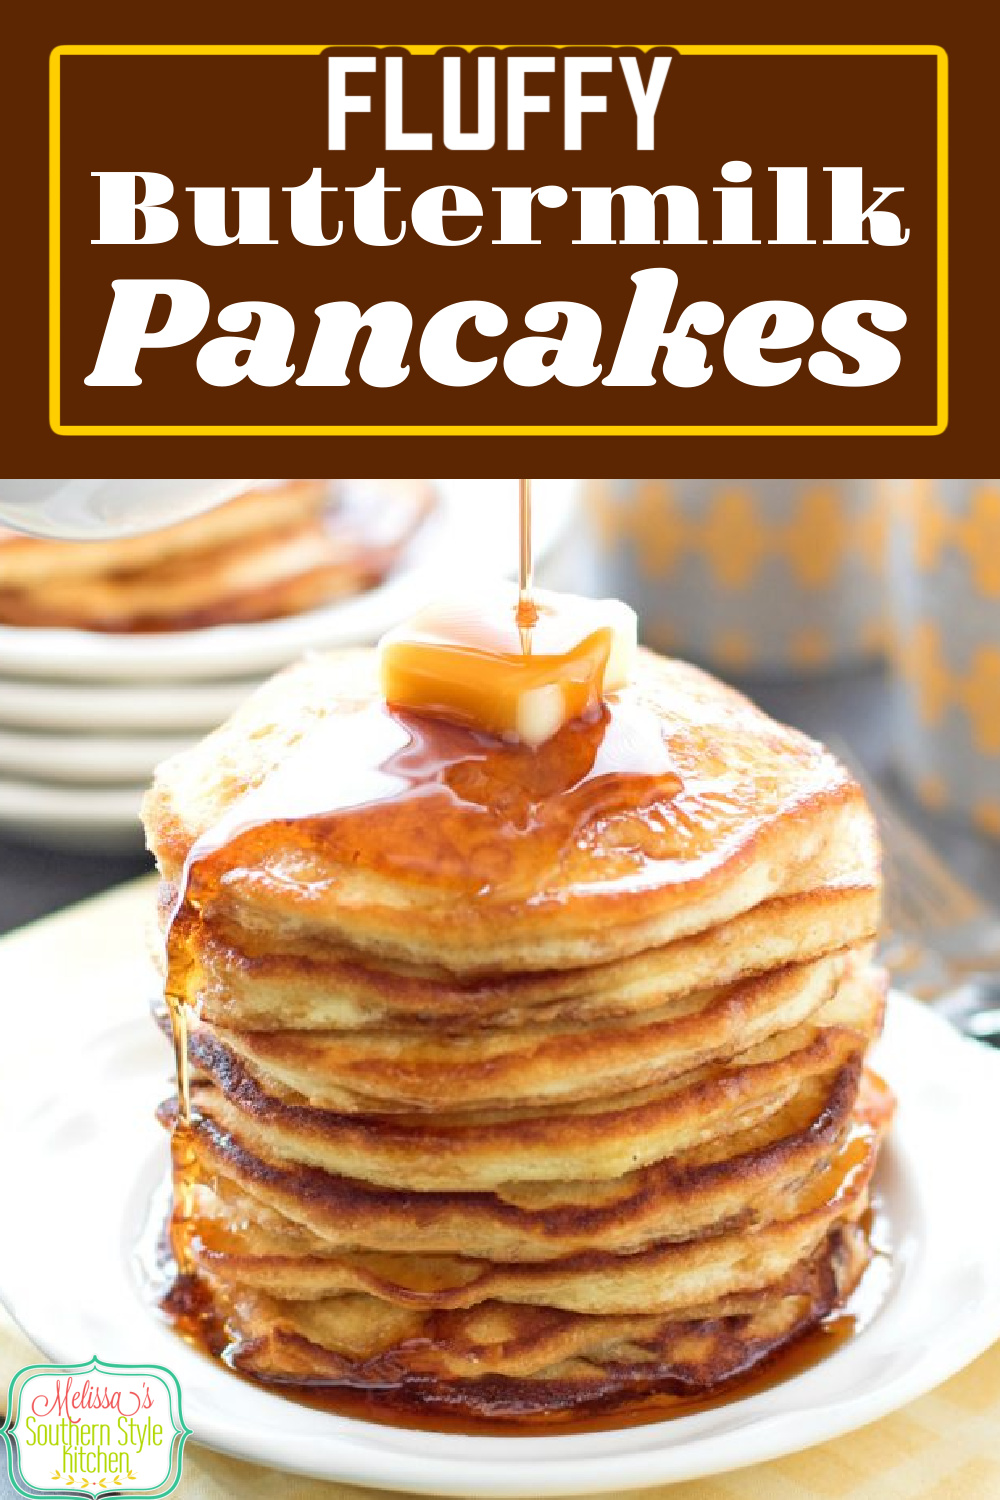 Start your day with a big stack of Fluffy Buttermilk Pancakes drizzled with pure maple syrup #pancakes #buttermilkpancakes #flapjacks #breakfast #brunch #holidaybrunch #bunchrecipes #bestrecipes #southernrecipes #southernfood #holidaybrunchrecipes #melissassouthernstylekitchen via @melissasssk